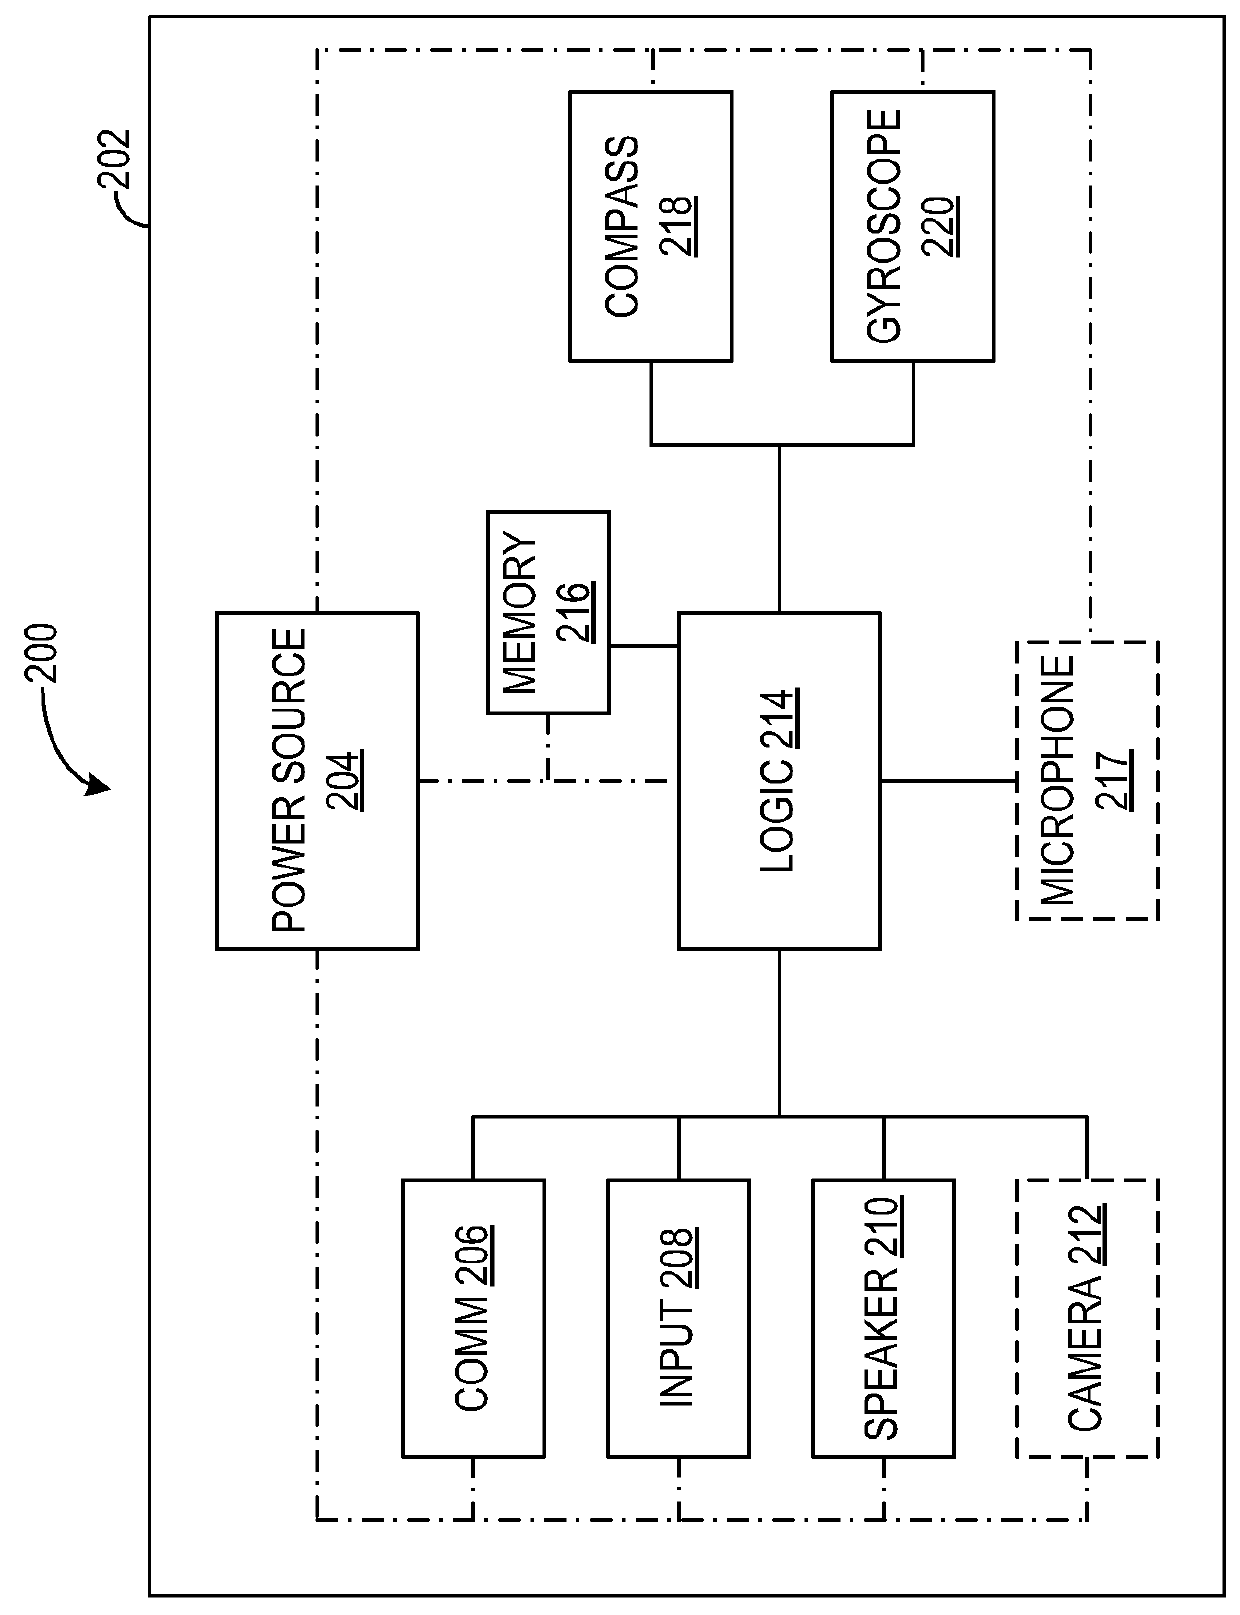 Multimedia output and display device selection